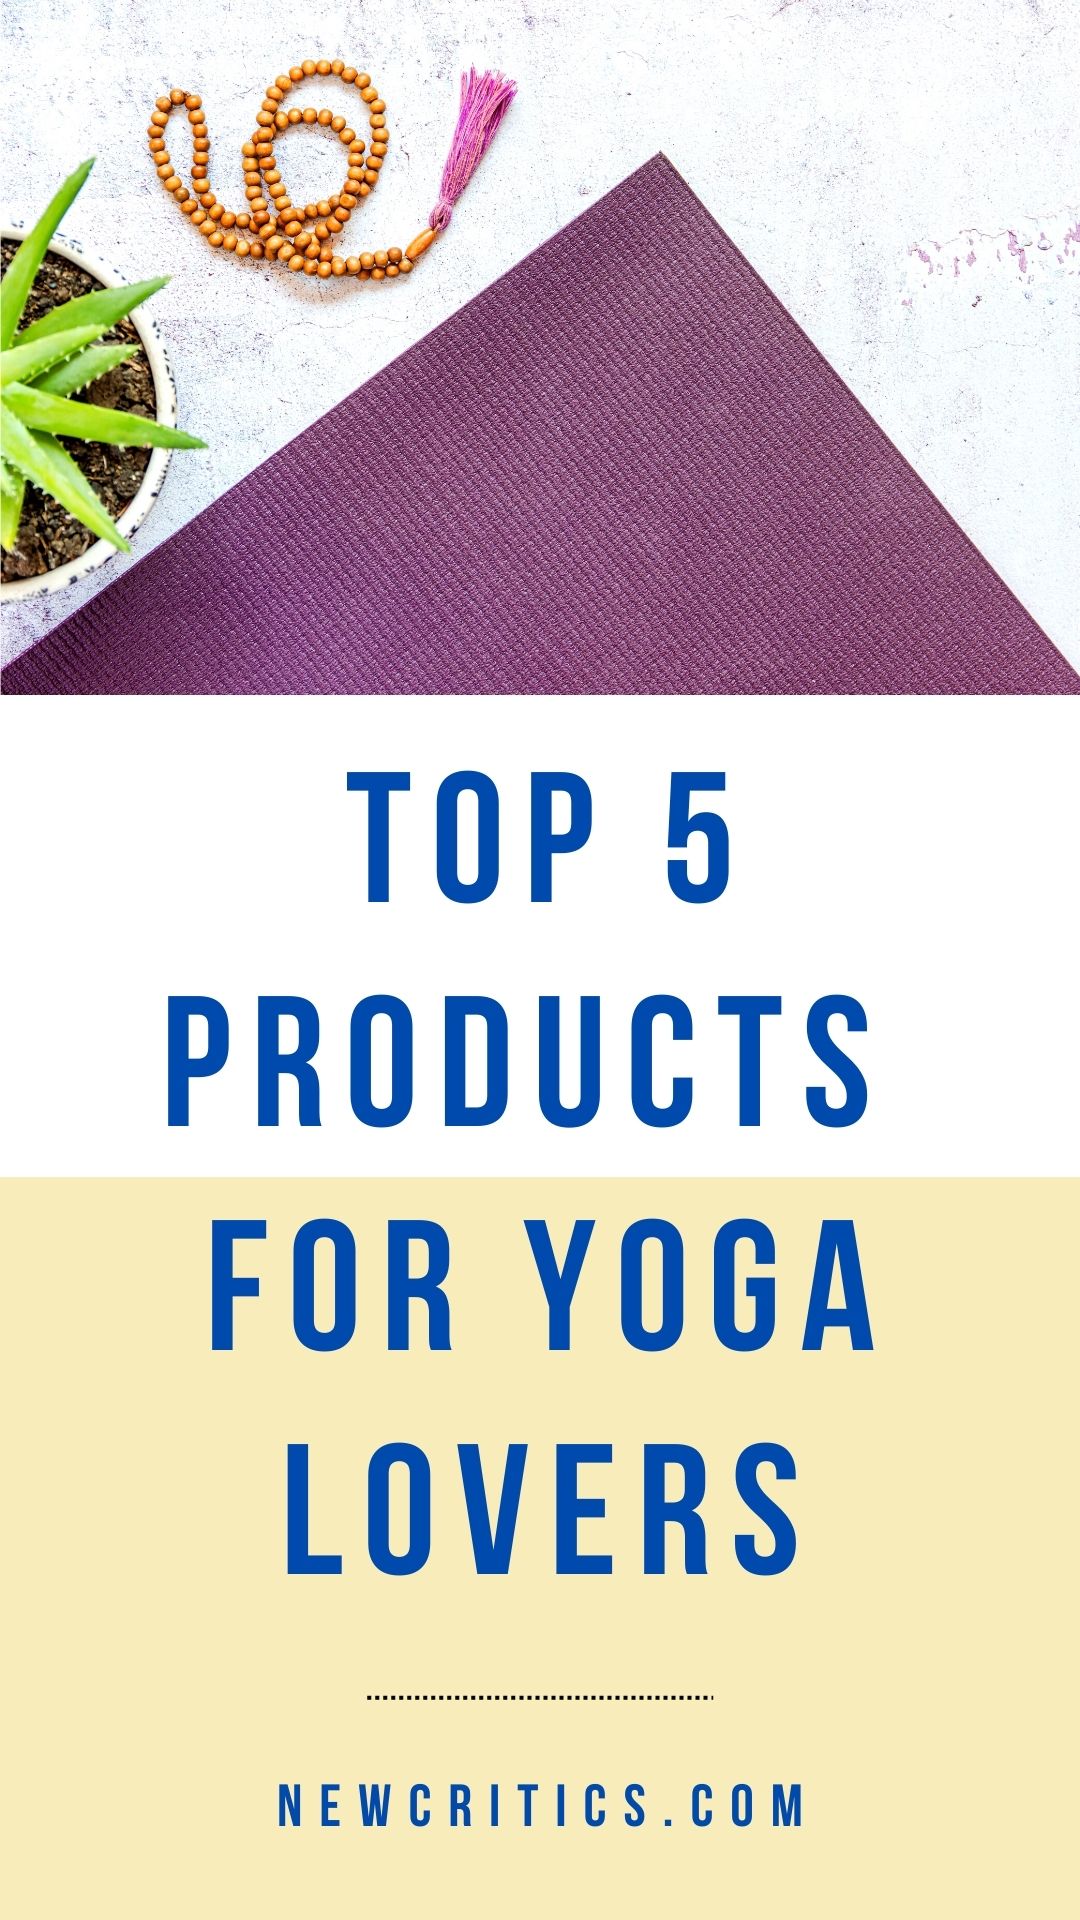 Top 5 Products for Yoga Lovers / Canva